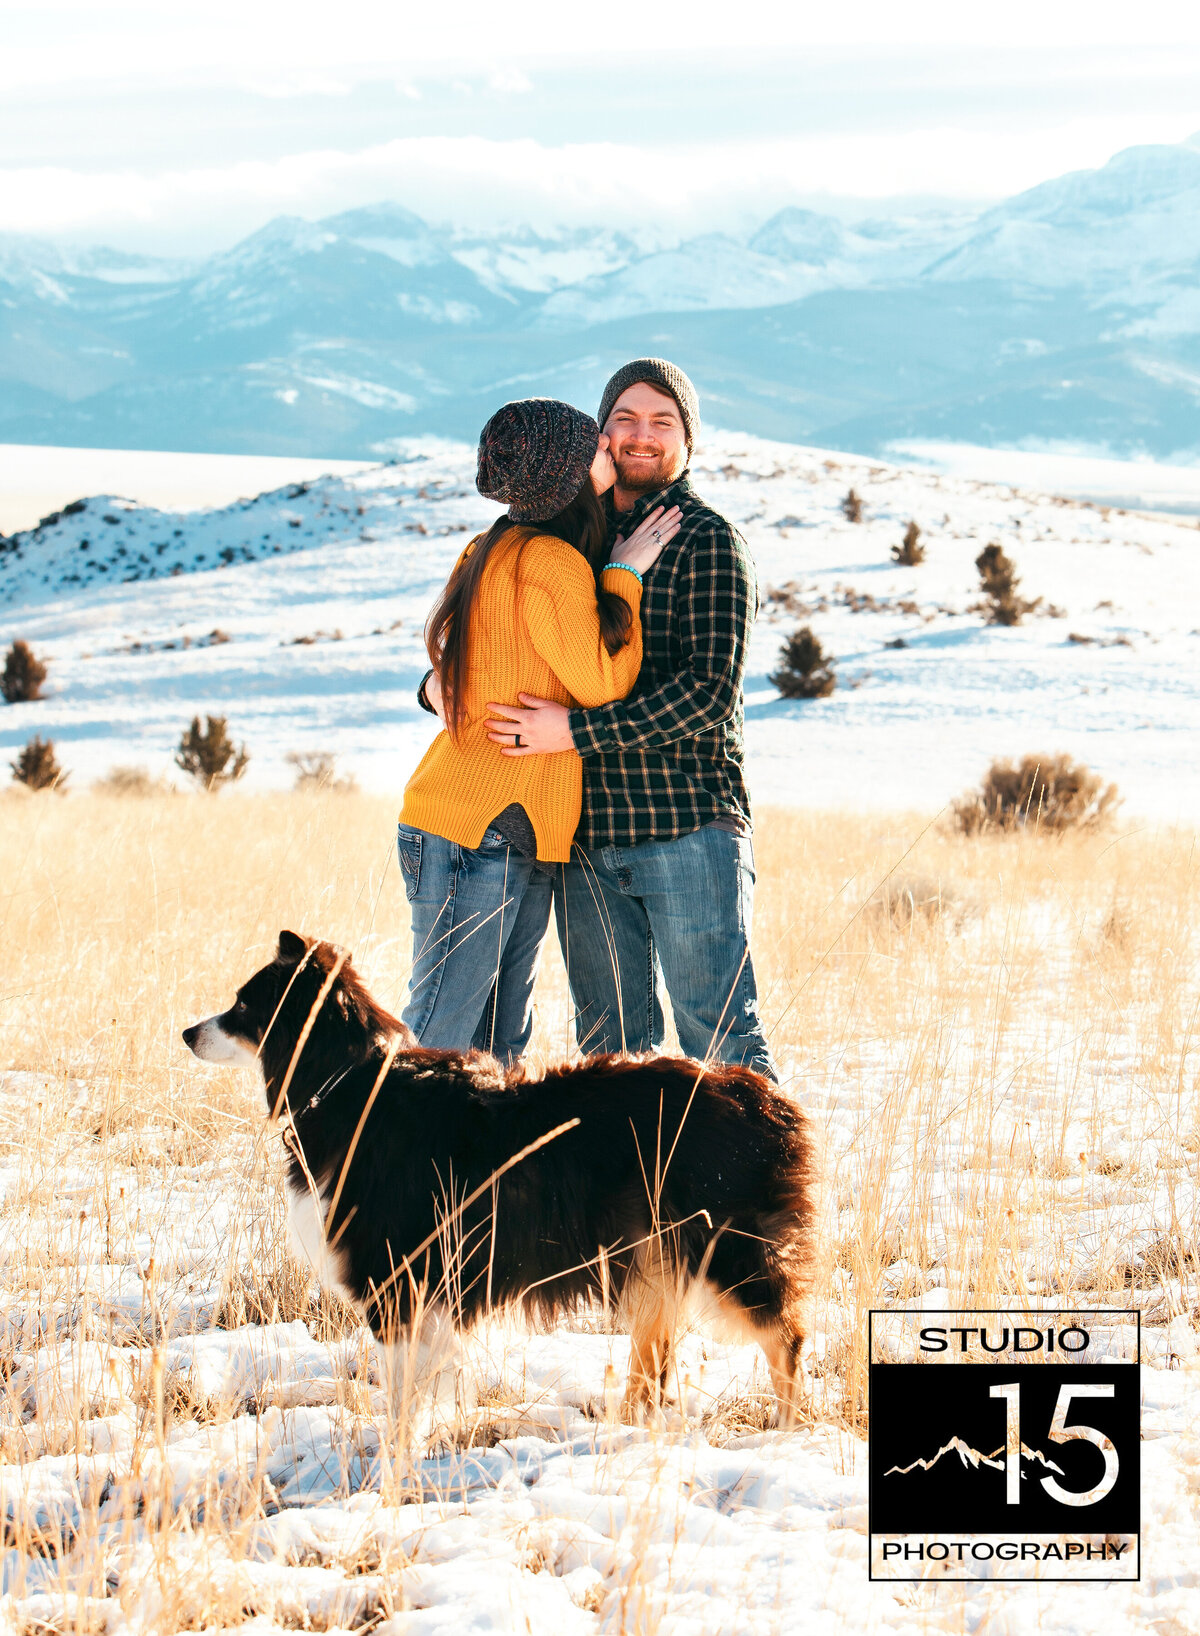 Studio 15 Photography Couples Photography Star Valley Ranch Wyoming Photographer Jackson Hole Couple Photographer Eastern Oregon Couples Photographer Idaho Falls Photographer Couples with dog photos Mountain Photos Outdoor Couples Photos